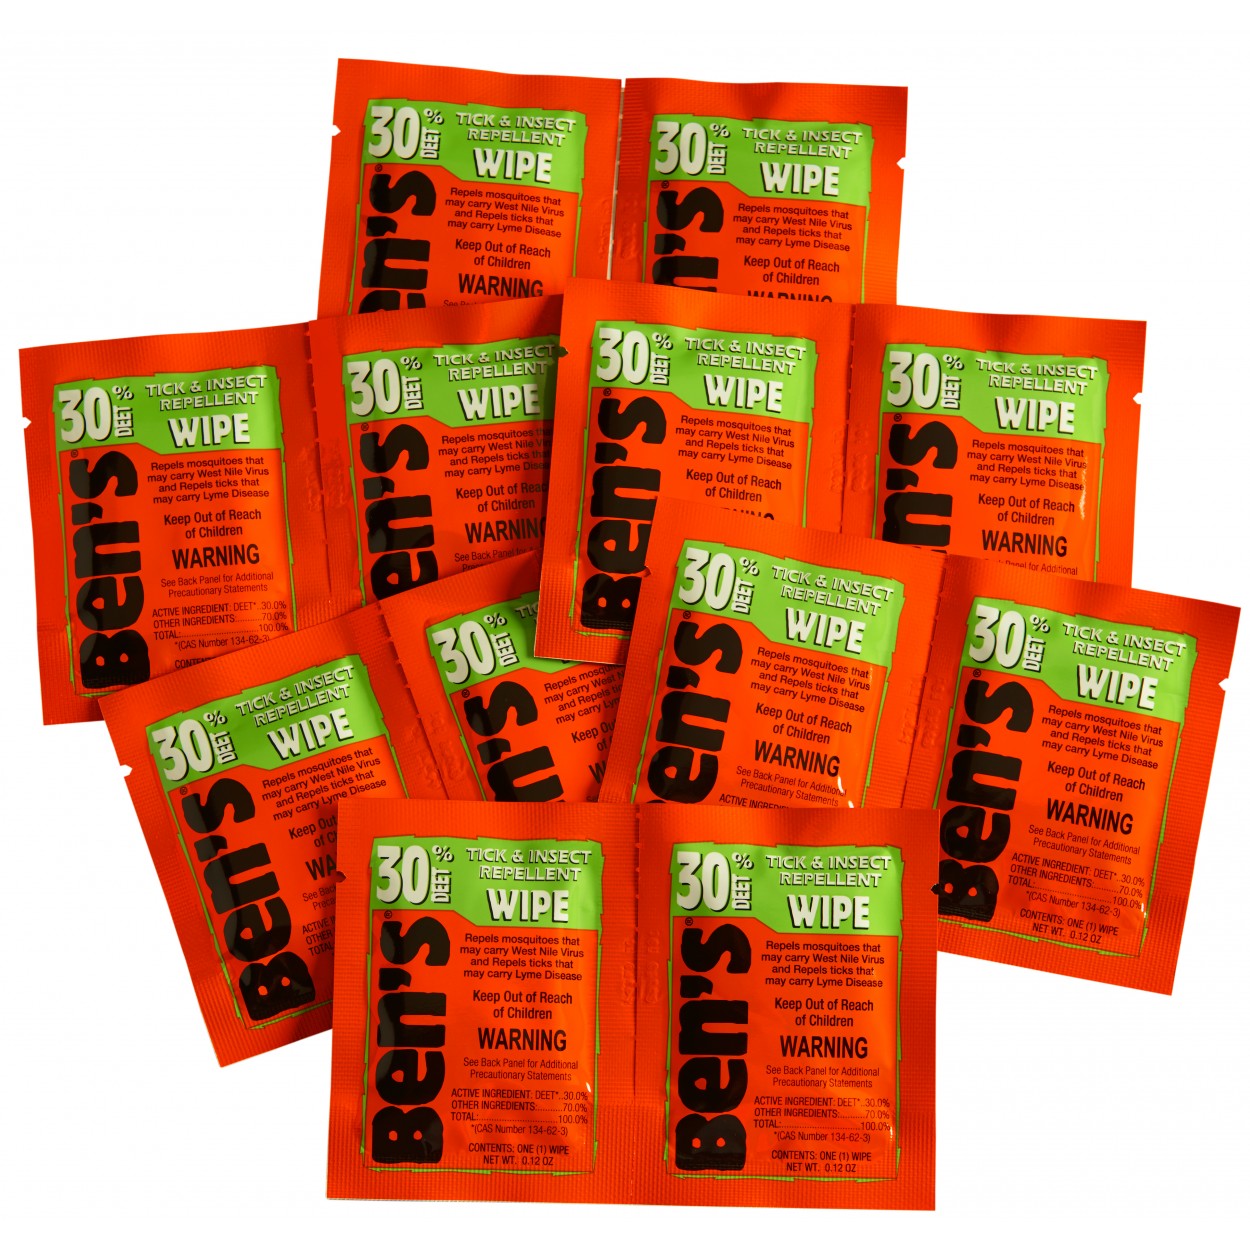 Ben's 30 Tick and Insect Repellent Wipes from GME Supply